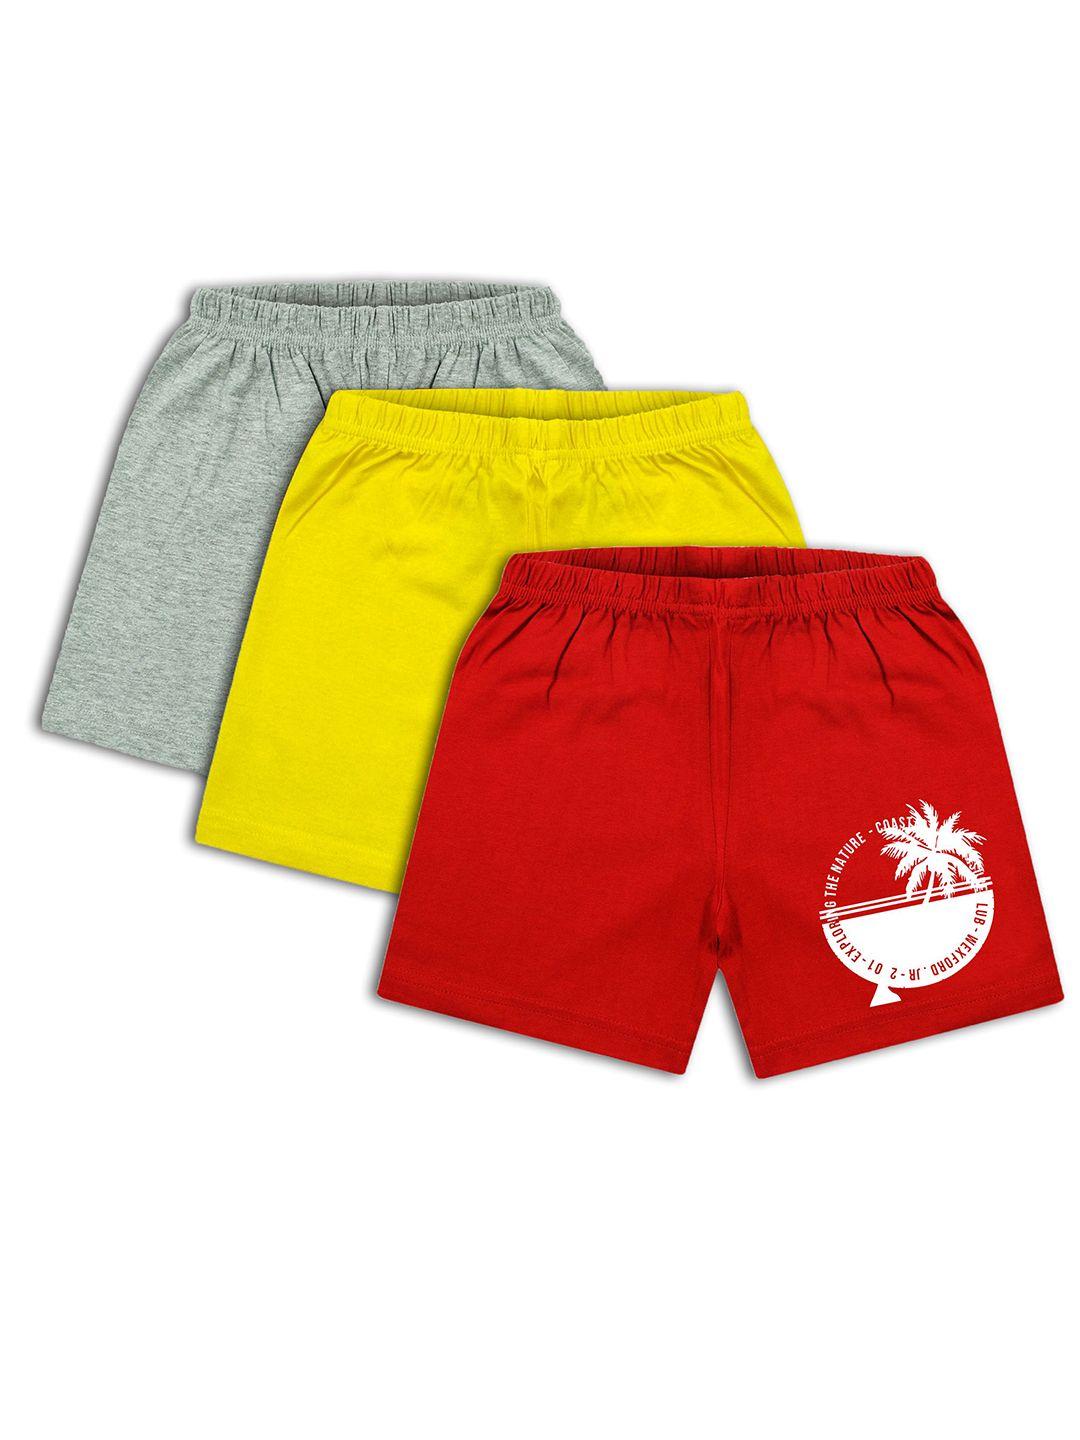 cooltees4u pack of 3 boys graphic printed cotton shorts